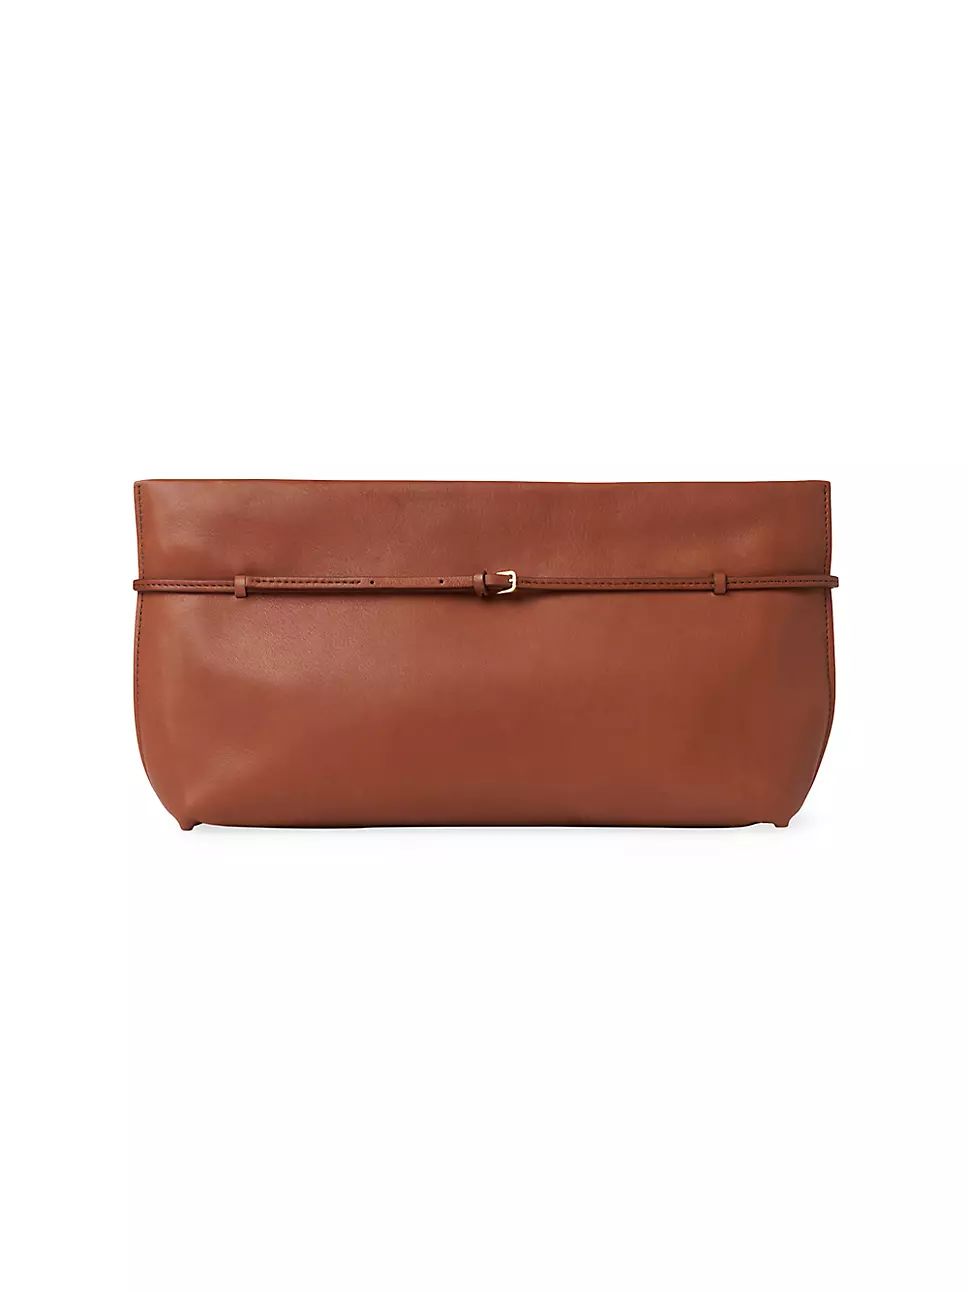 Sienna Belted Leather Clutch | Saks Fifth Avenue